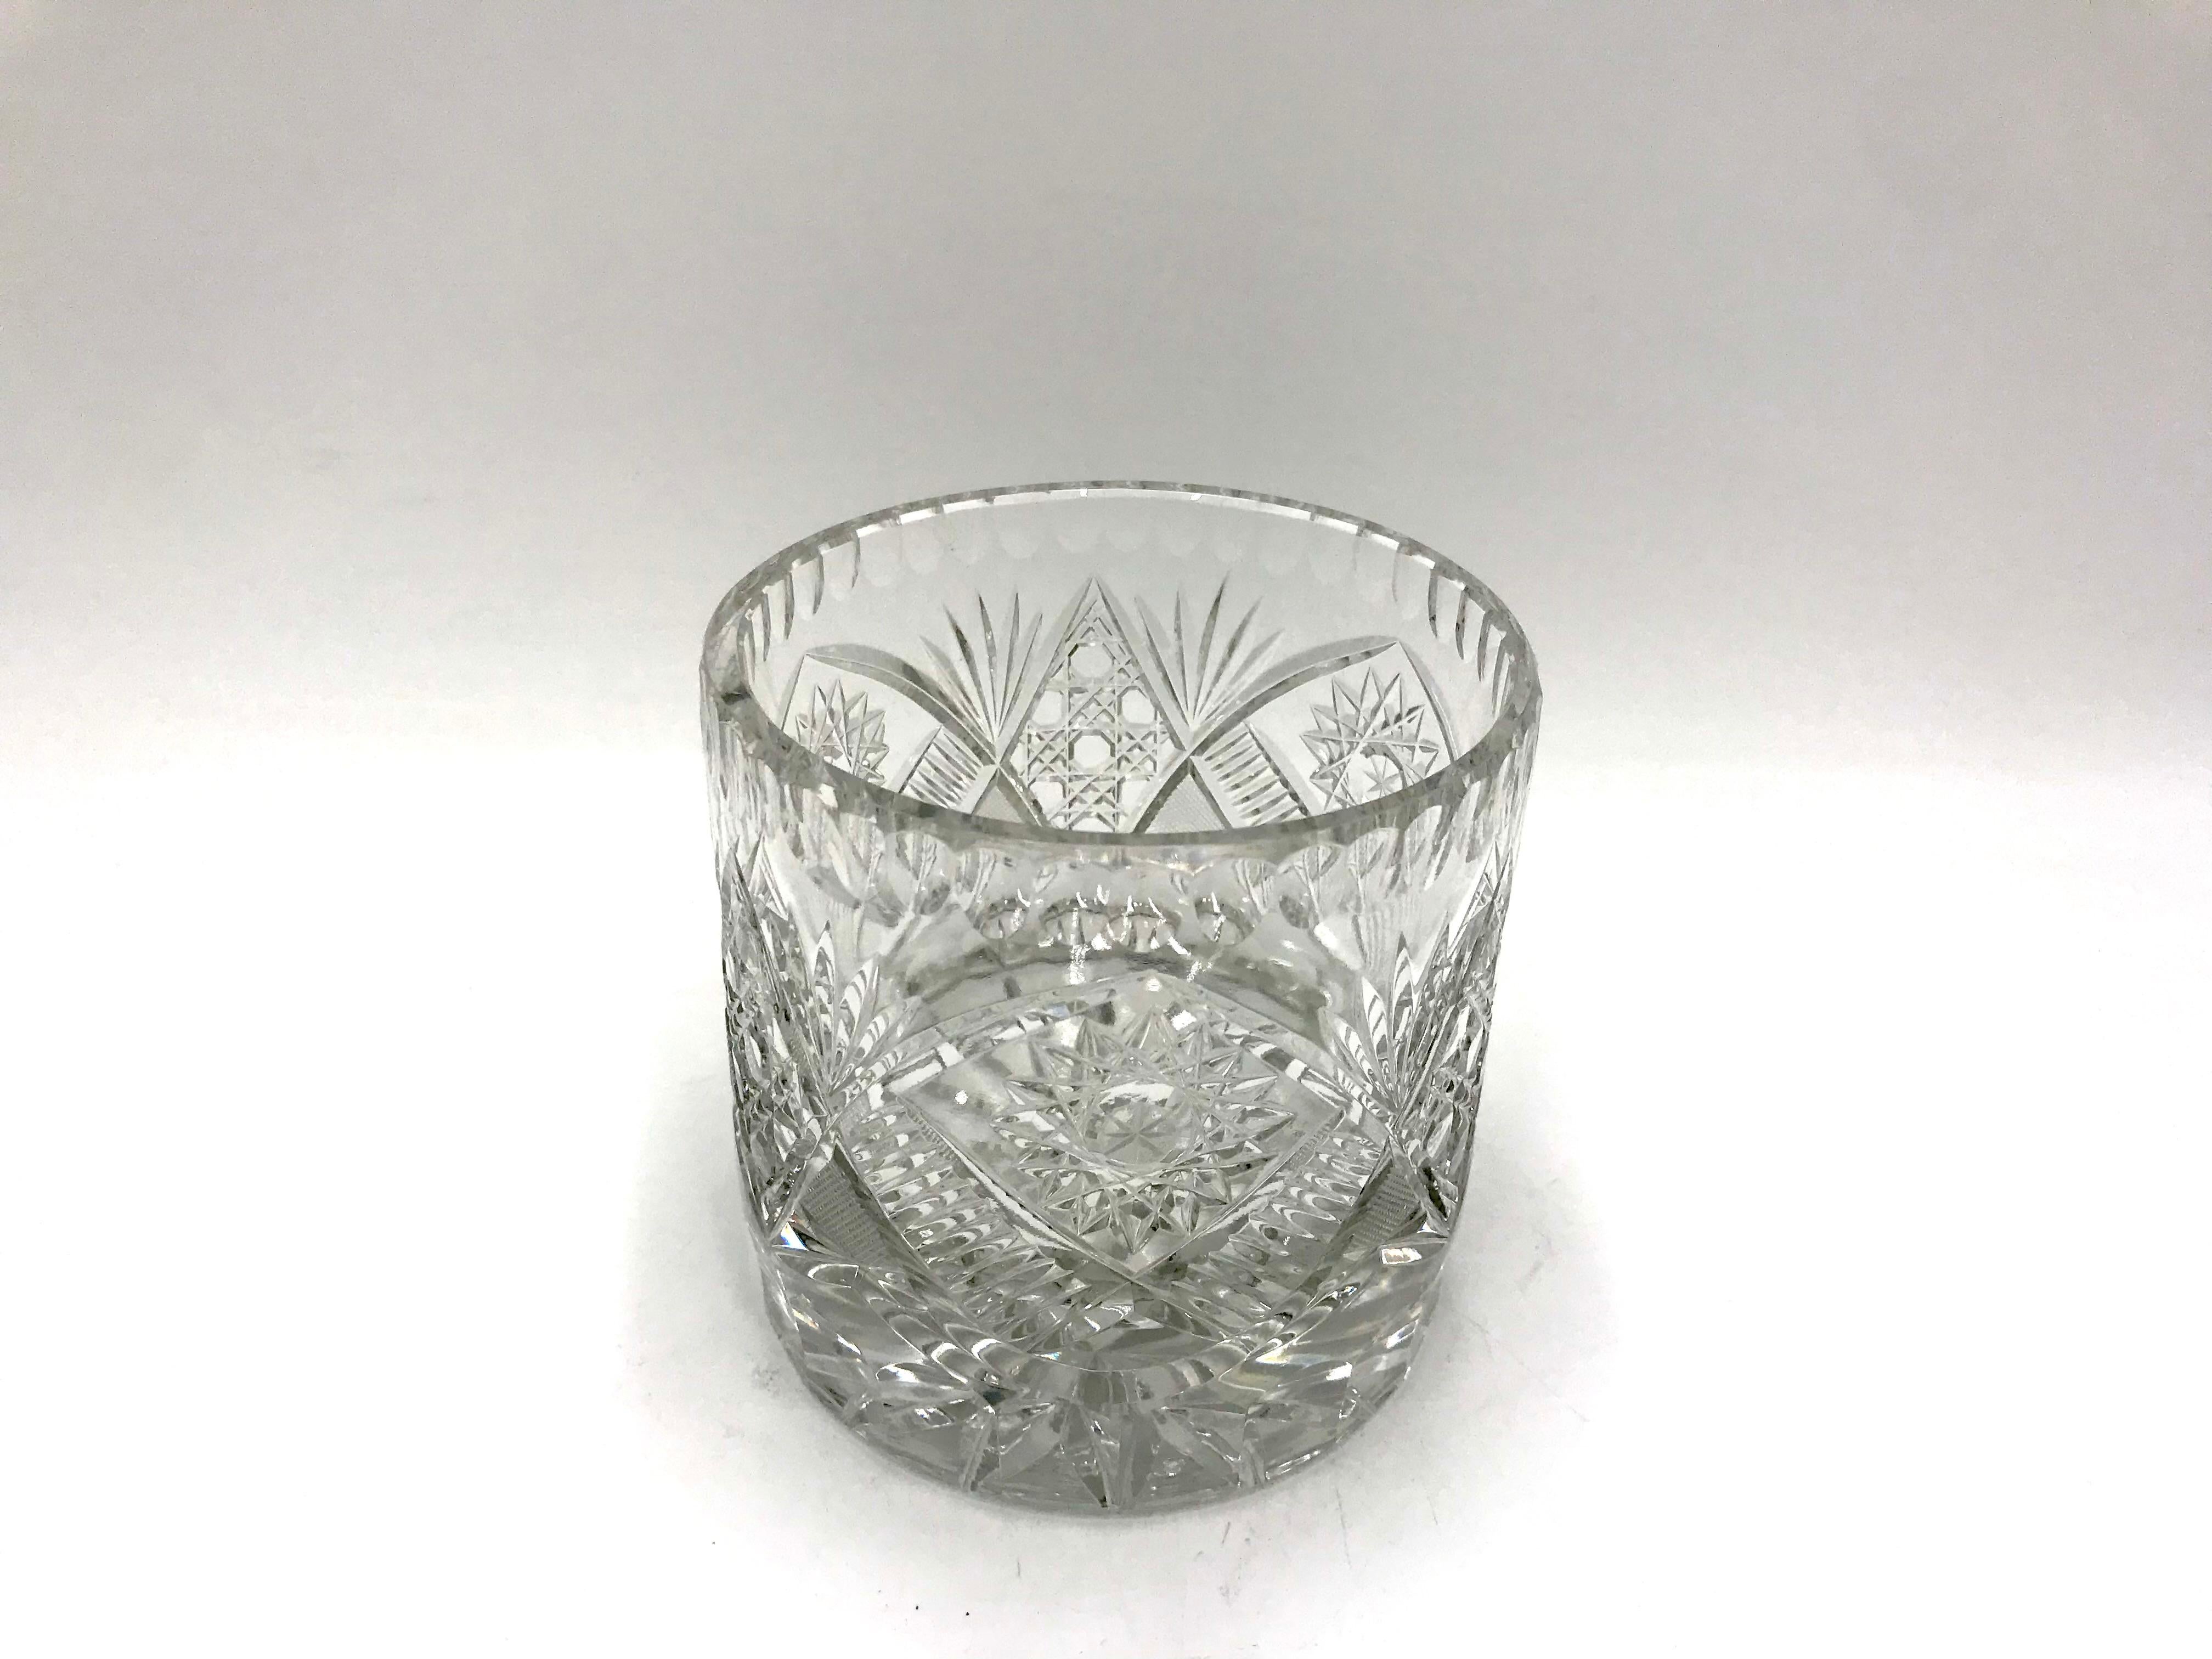 Crystal bowl 
Made in Poland in the 1950s / 1960s.
Very good condition.
Dimensions: height 12cm, diameter 12cm.